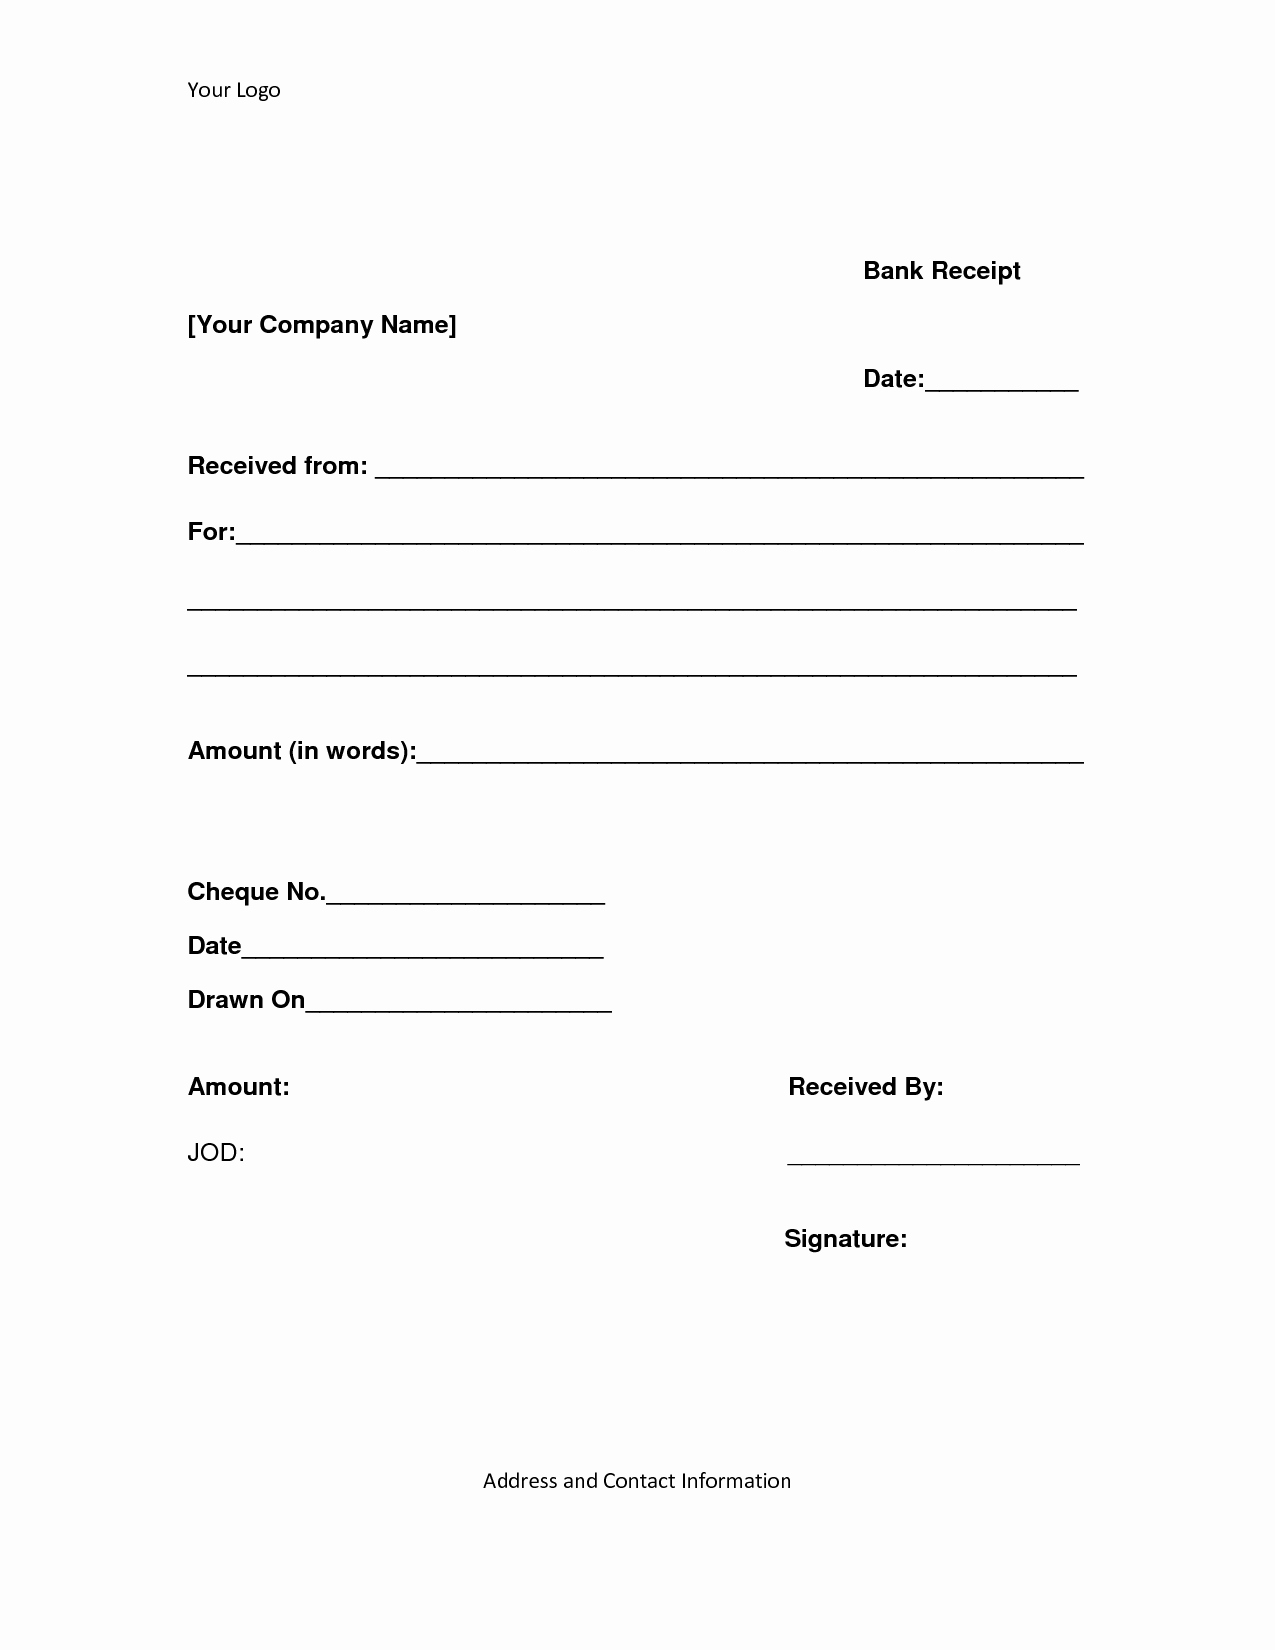 Child Support Agreement Template